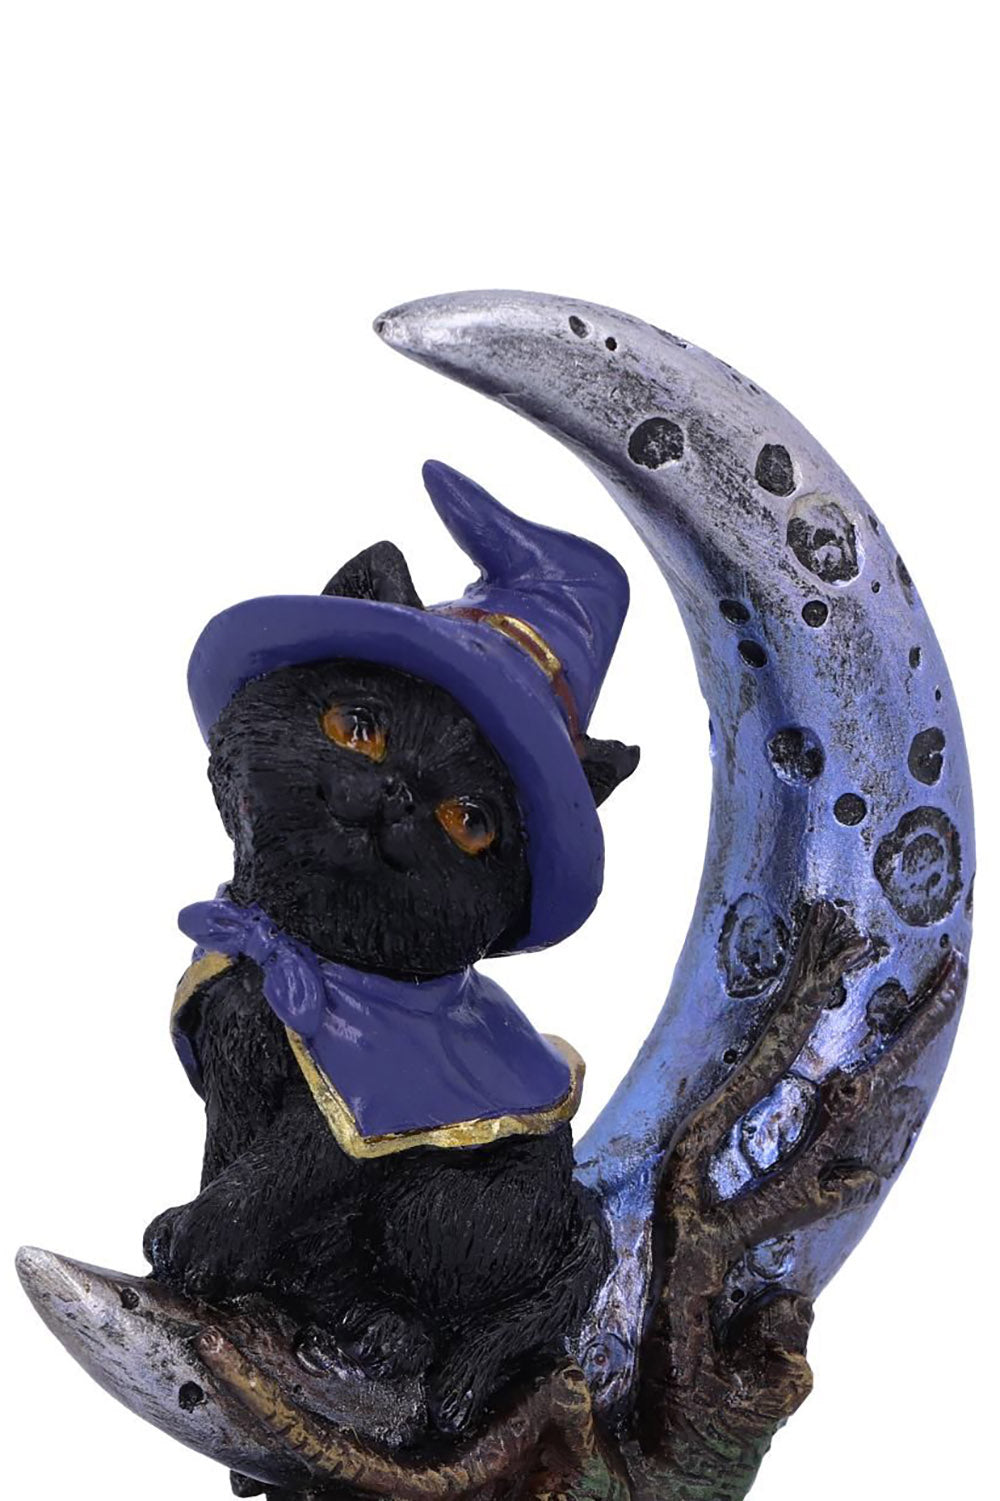 Spooky Witches Familiar Black Cat and Crescent Moon Figurine